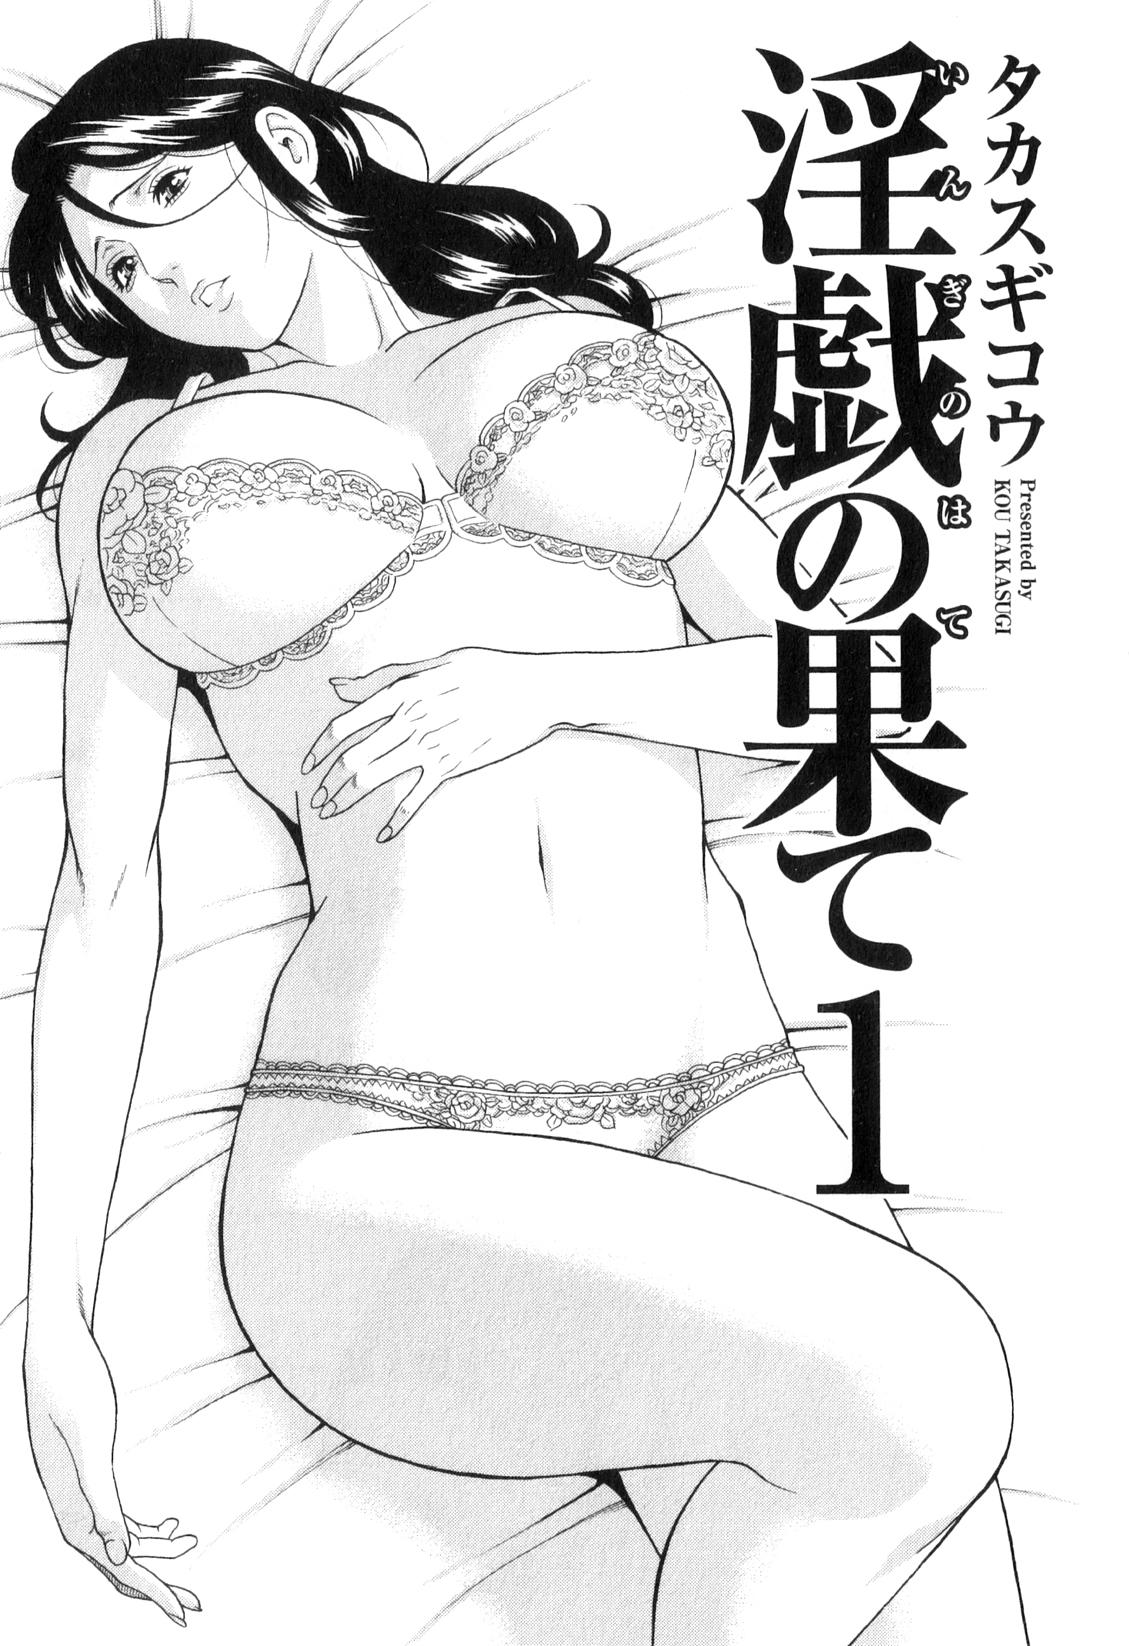 Off Ingi no Hate 1 Ch. 1 Free Amateur - Page 4